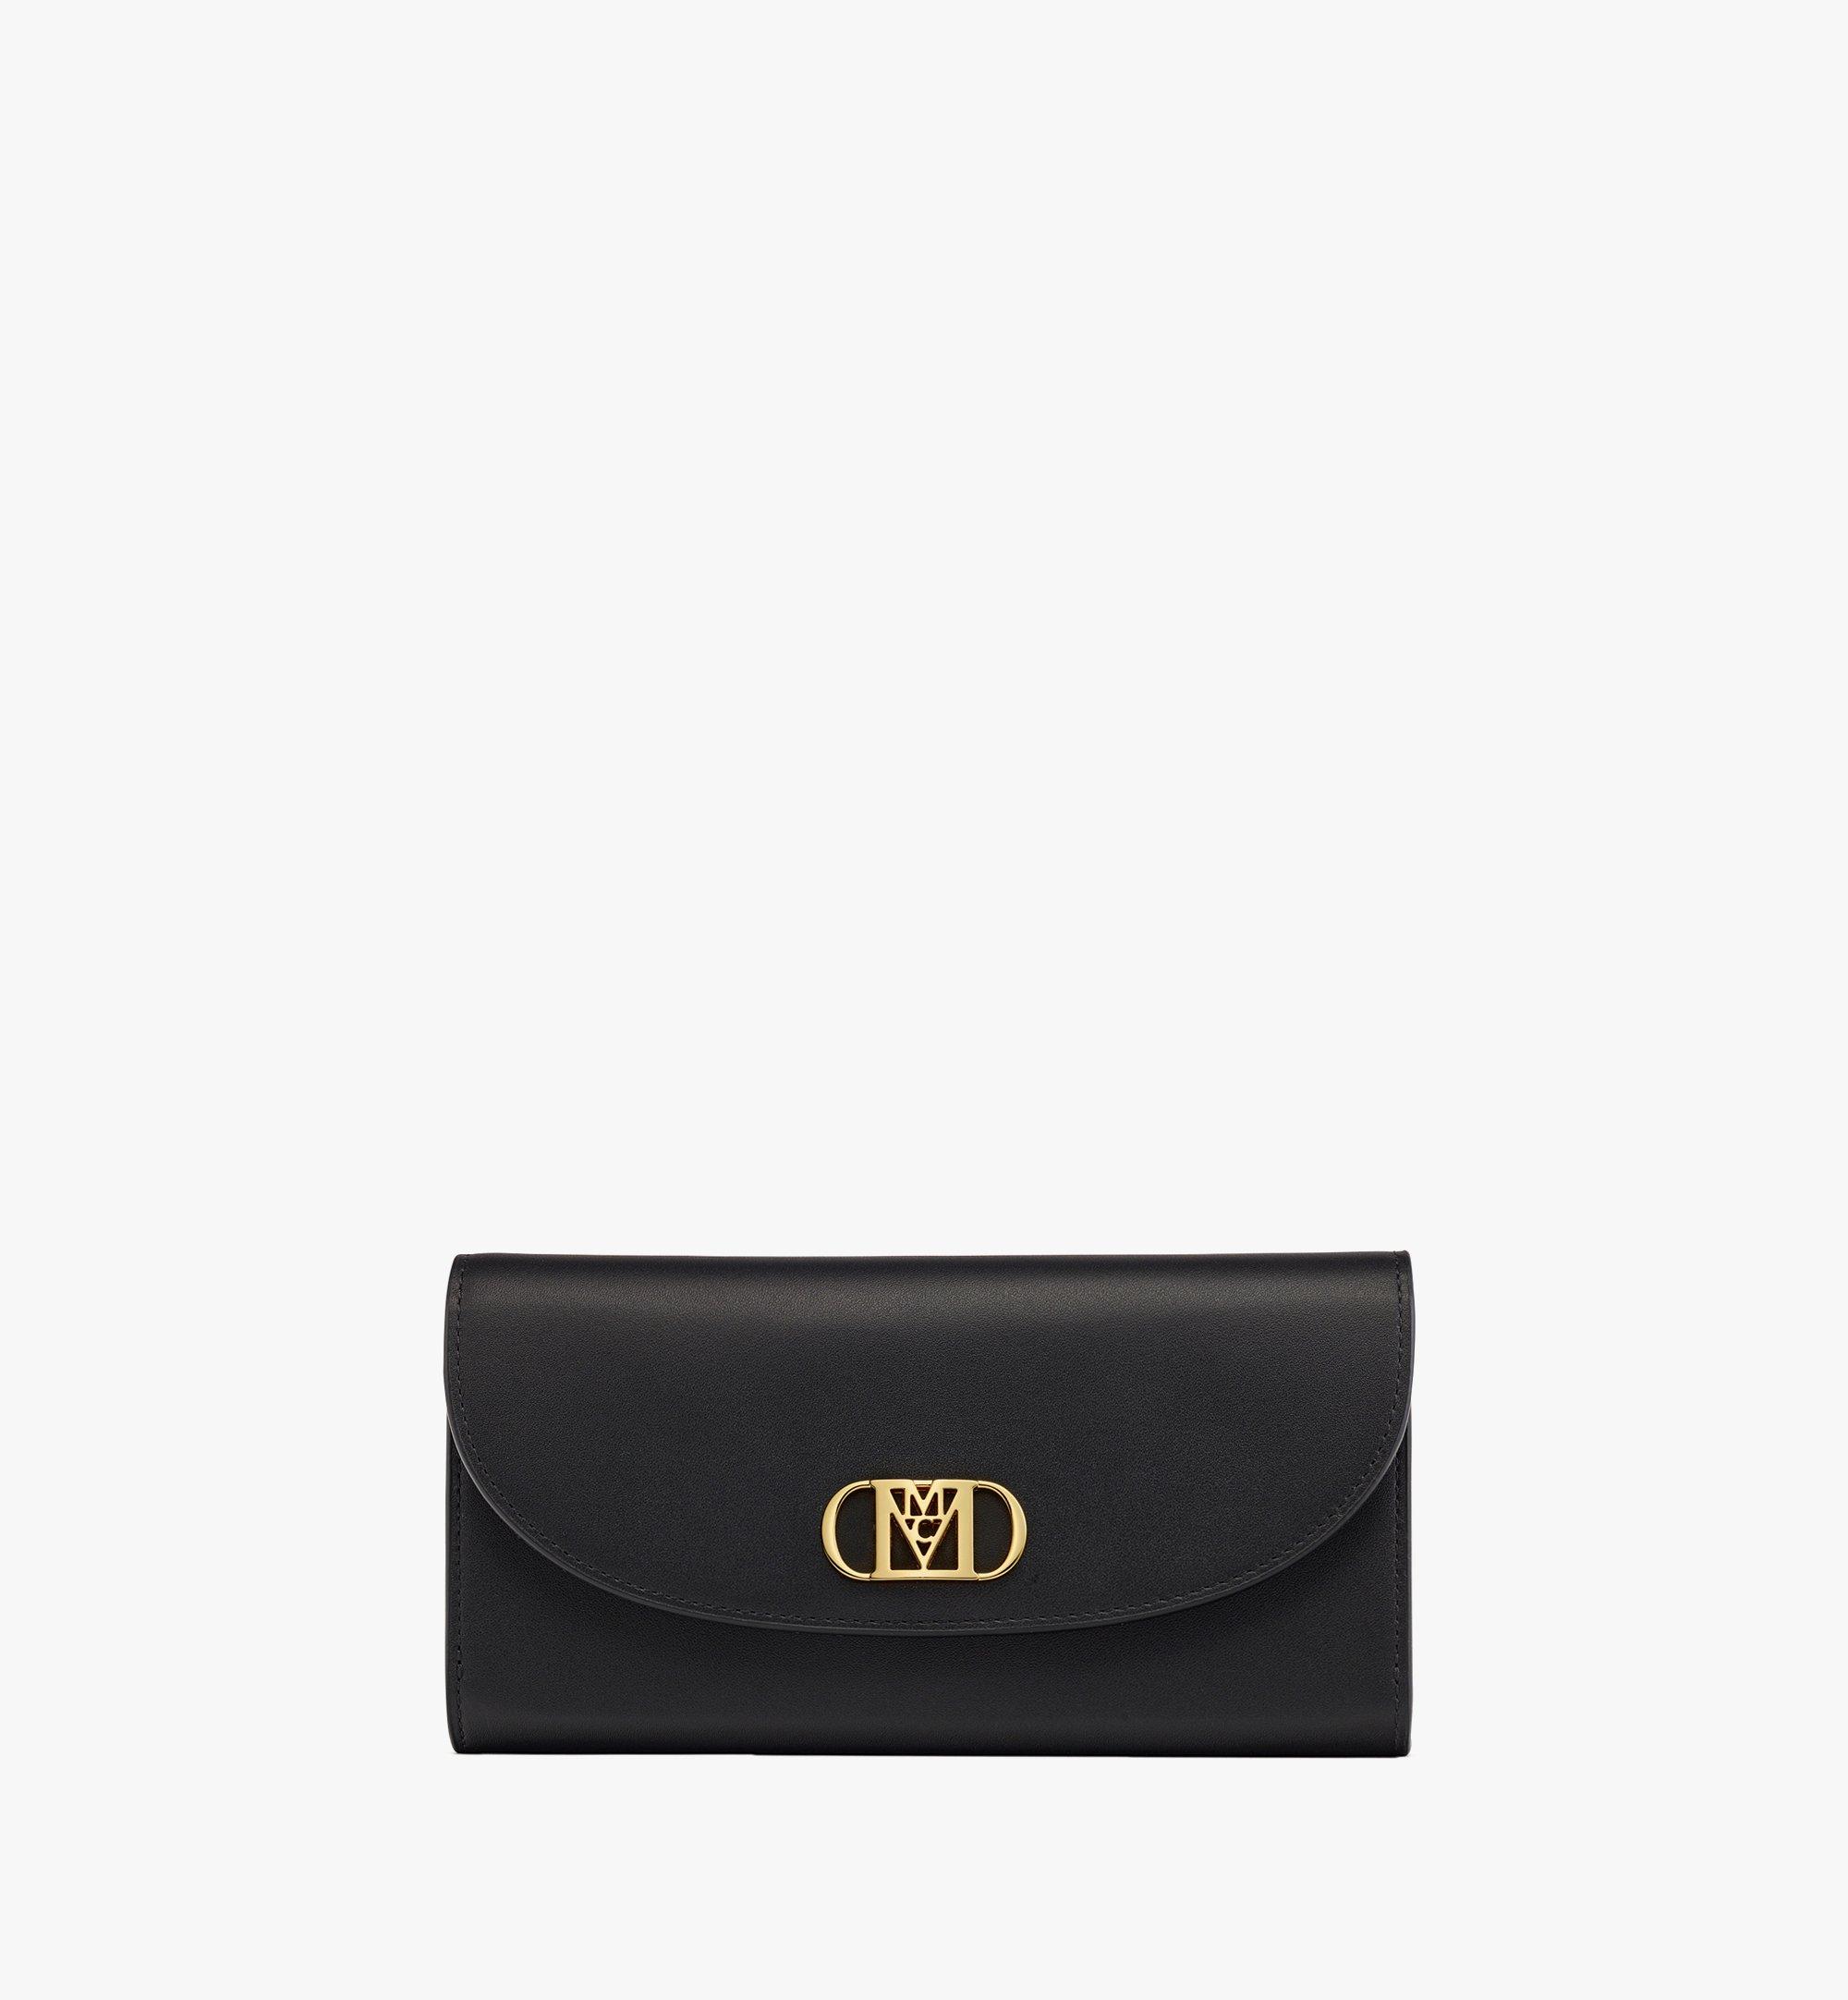 MCM Mode Travia Continental Wallet in Spanish Leather Black MYLDSLD01BK001 Alternate View 1